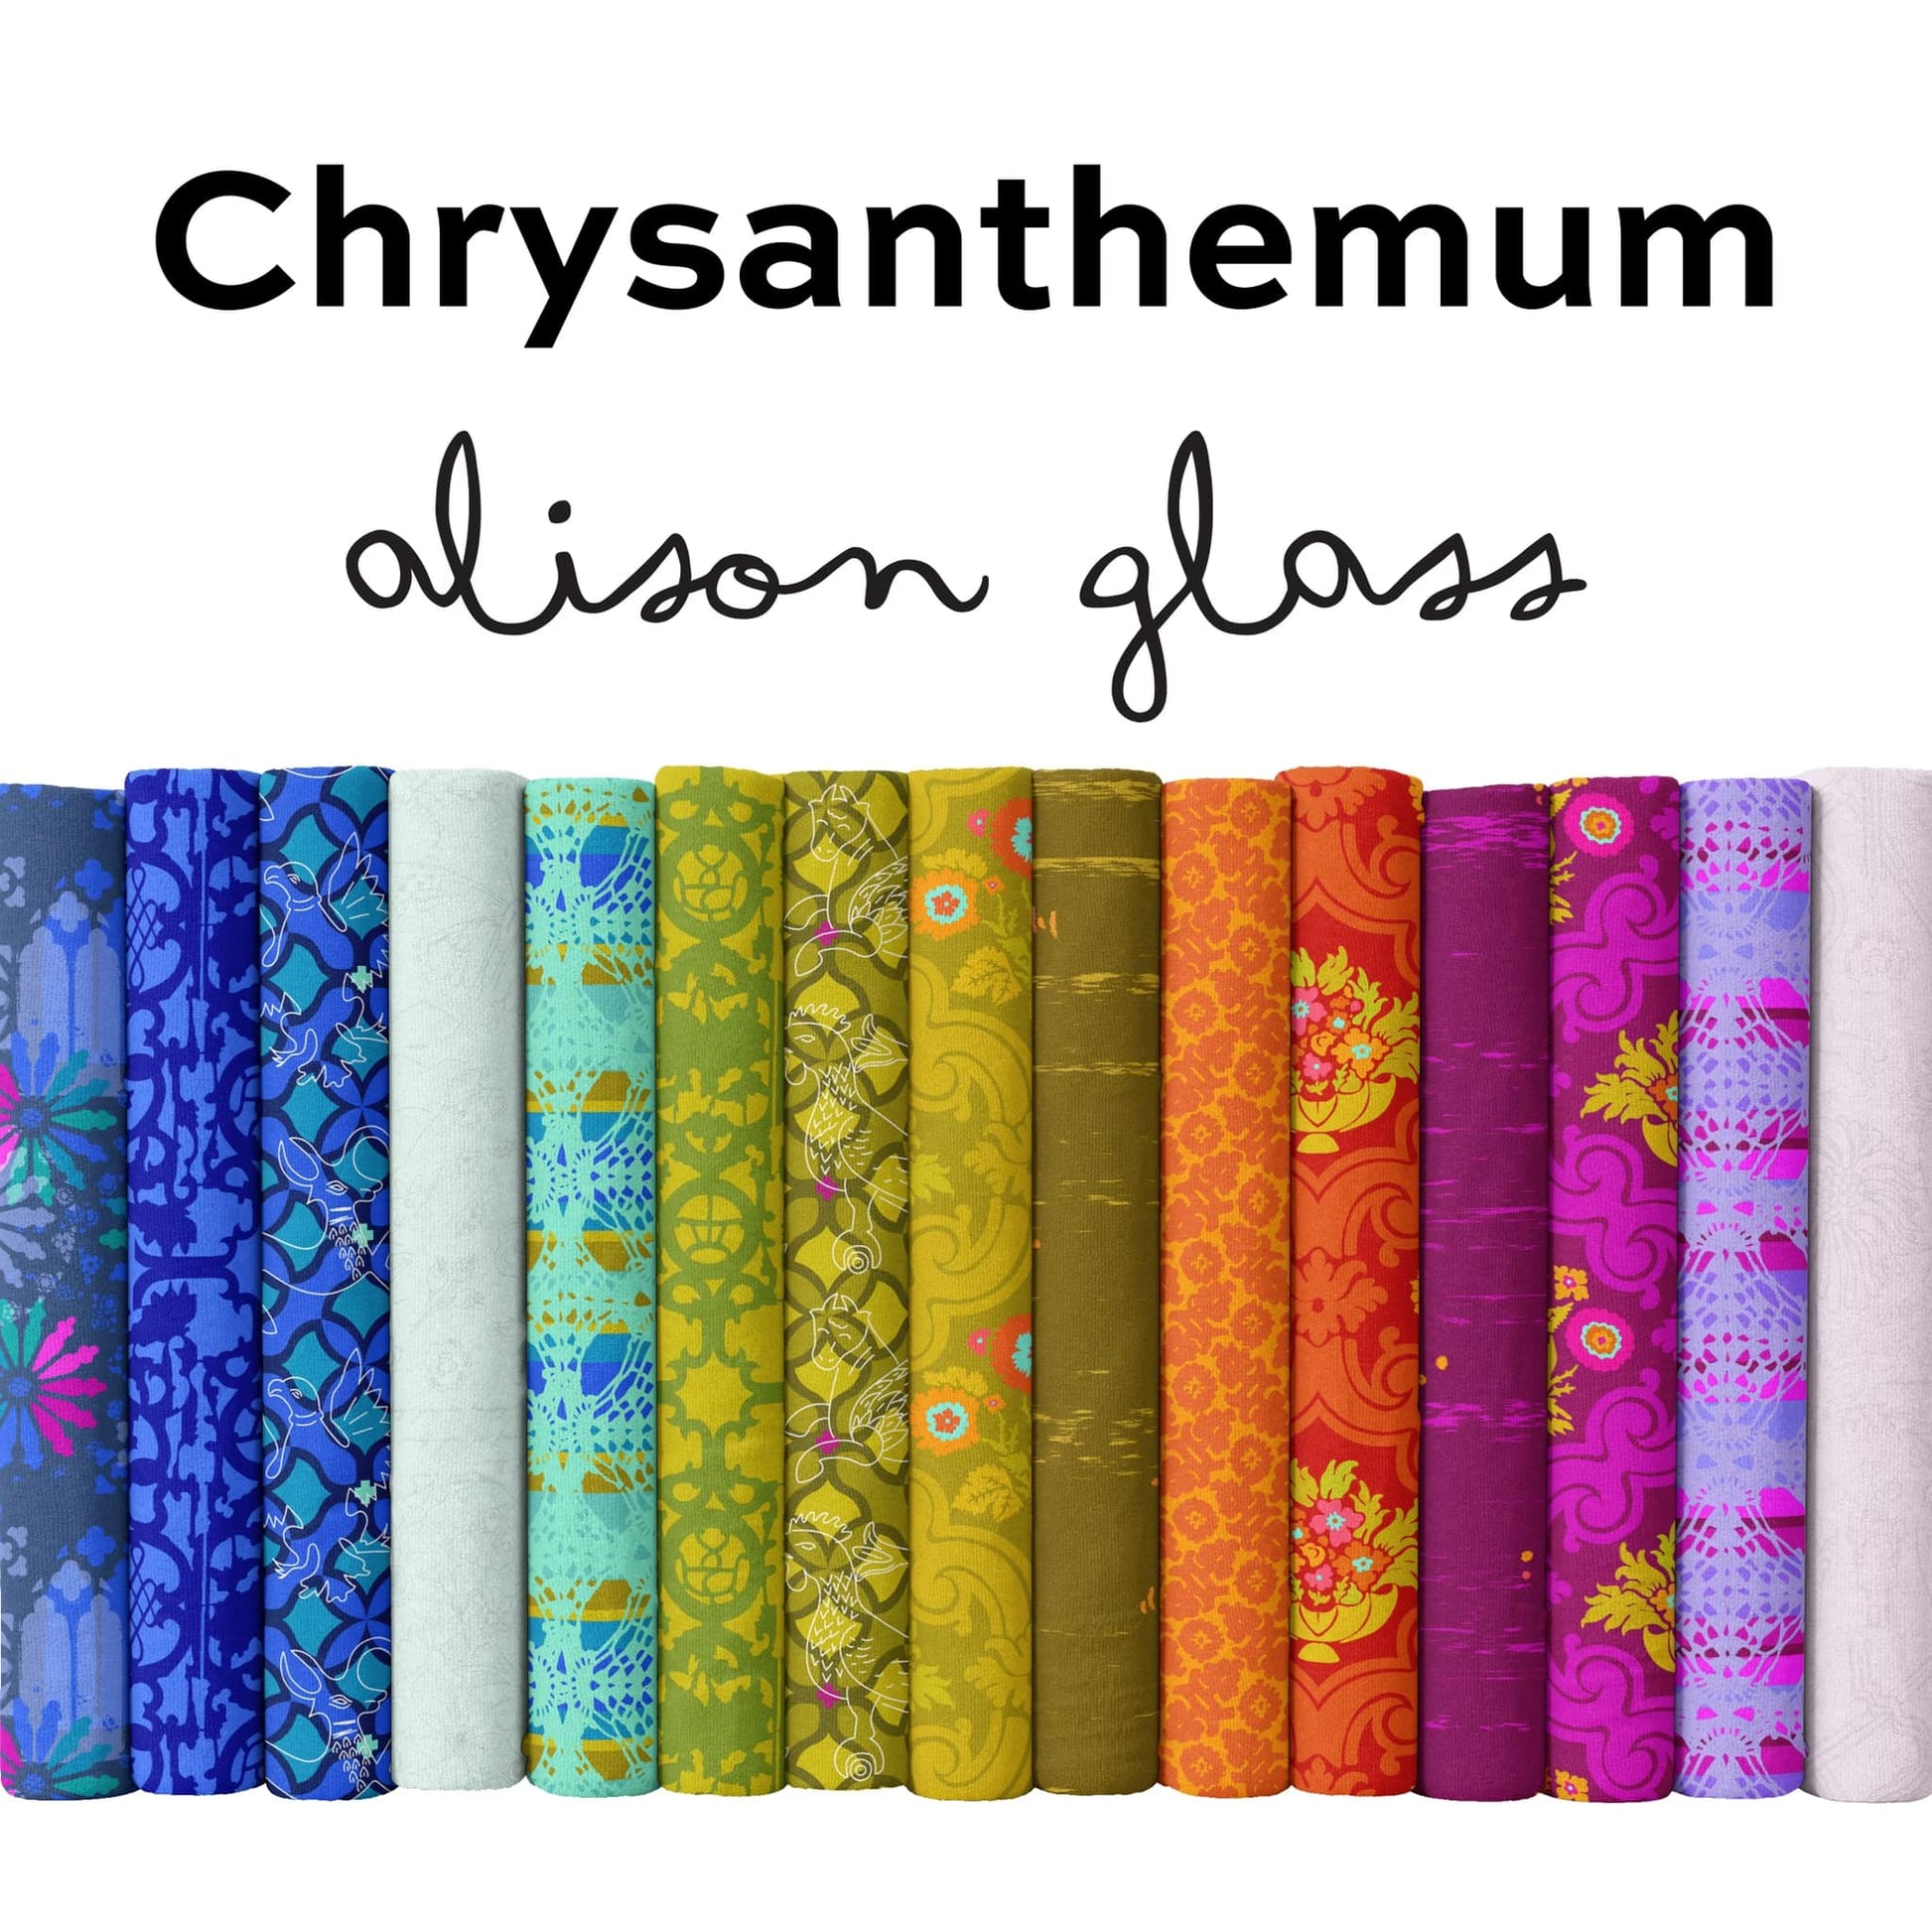 This FULL YARD BUNDLE contains 24 quilting cotton prints from Chrysanthemum by Alison Glass for Andover Fabrics  Manufacturer: Andover Fabrics Designer: Alison Glass Collection: Chrysanthemum Material: 100% Cotton Weight: Quilting